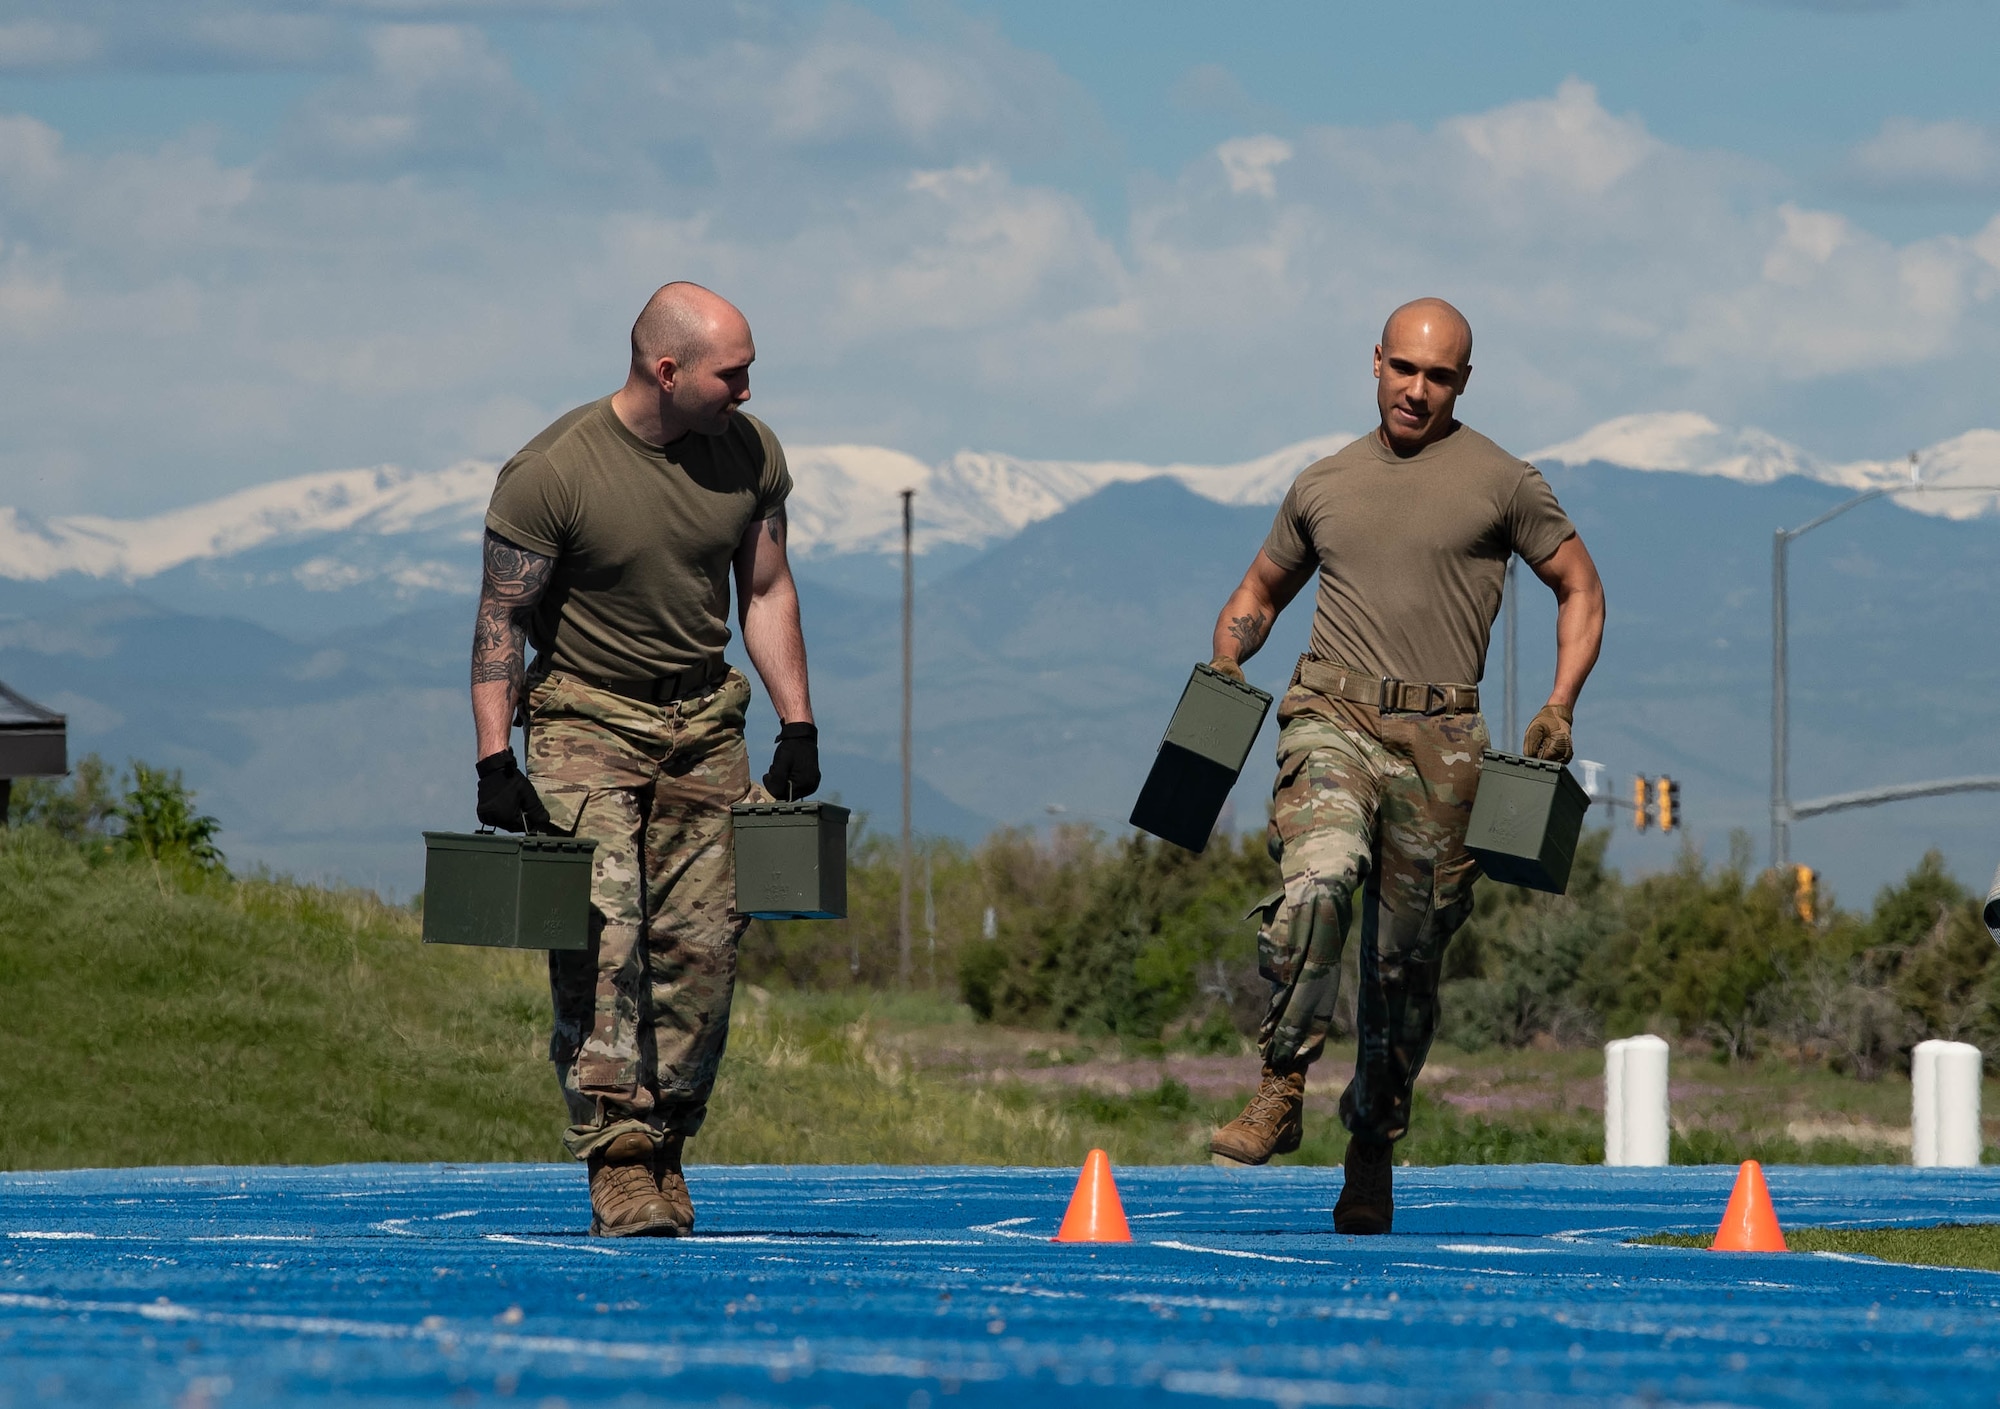 Two Men running with ammo cans